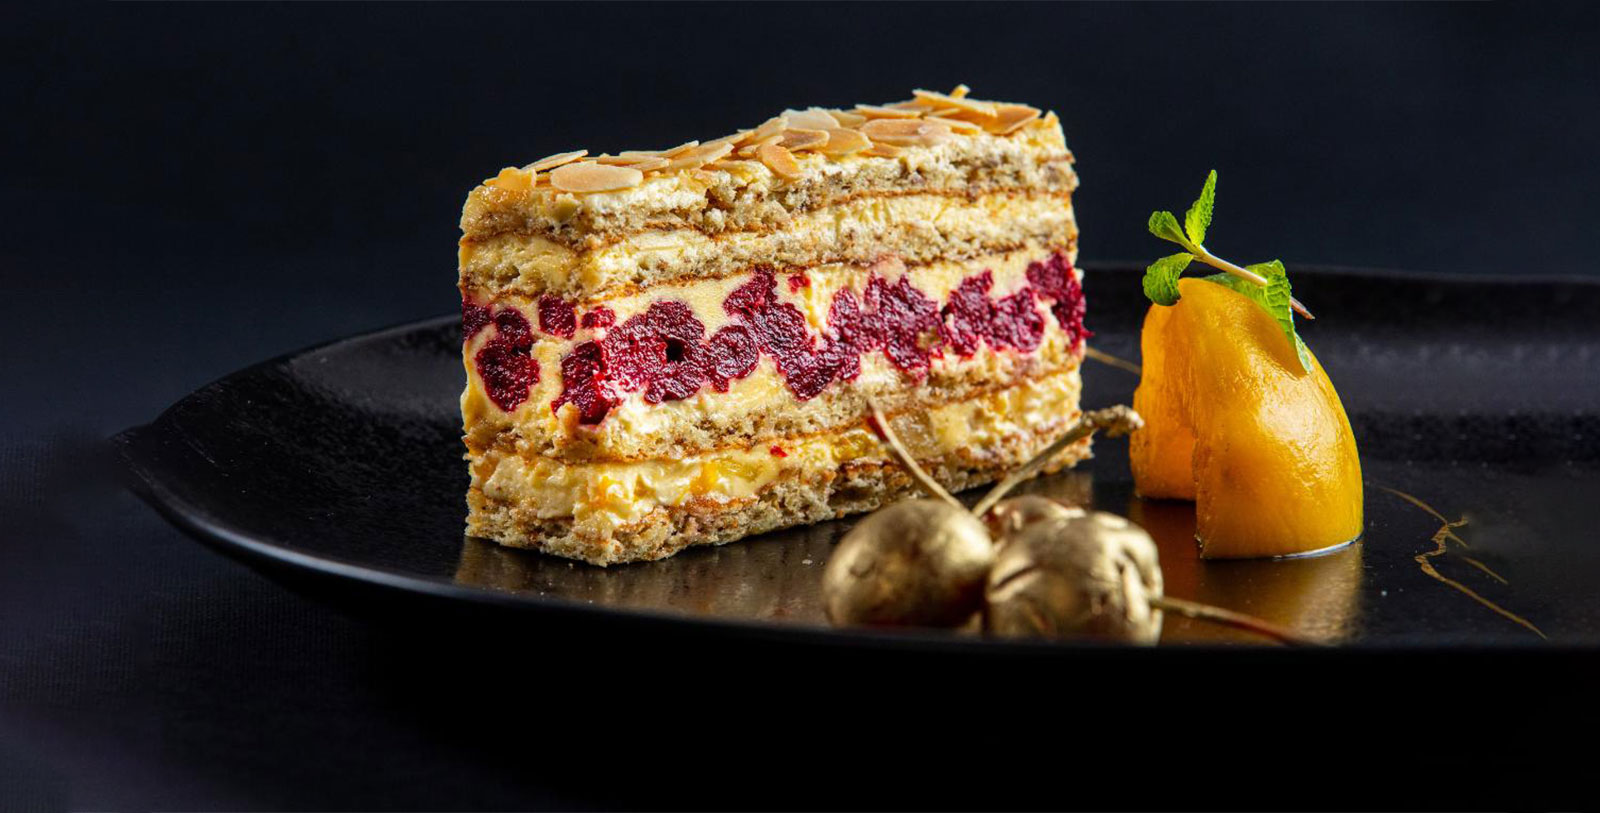 Taste the Moskva šnit, the signature cake of the Moskva Pastry Shop located inside the Hotel Moskva.